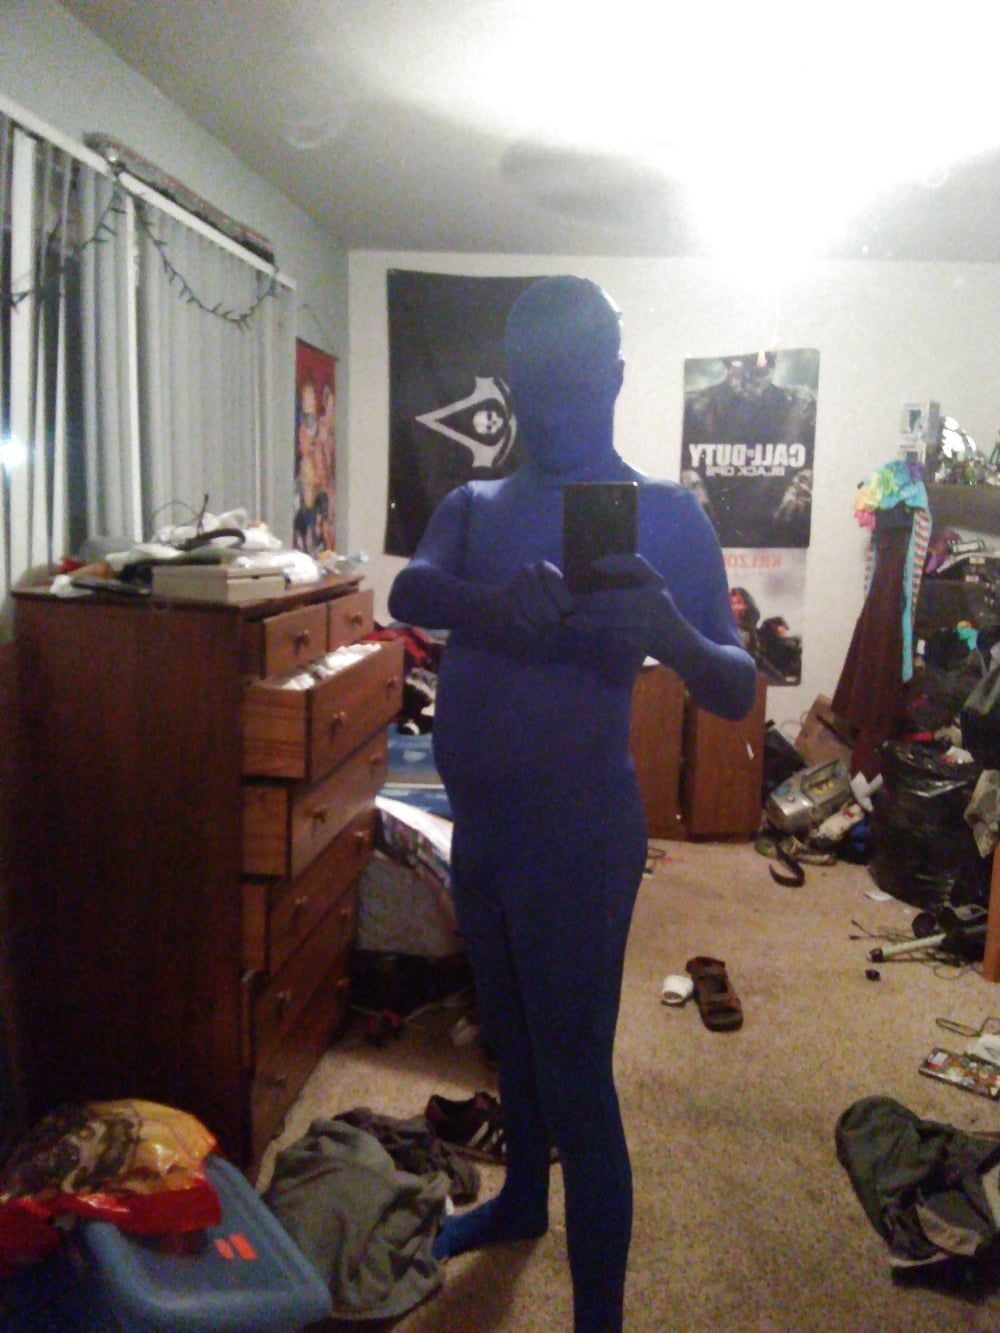 Me and My suits and Other pics of me #7